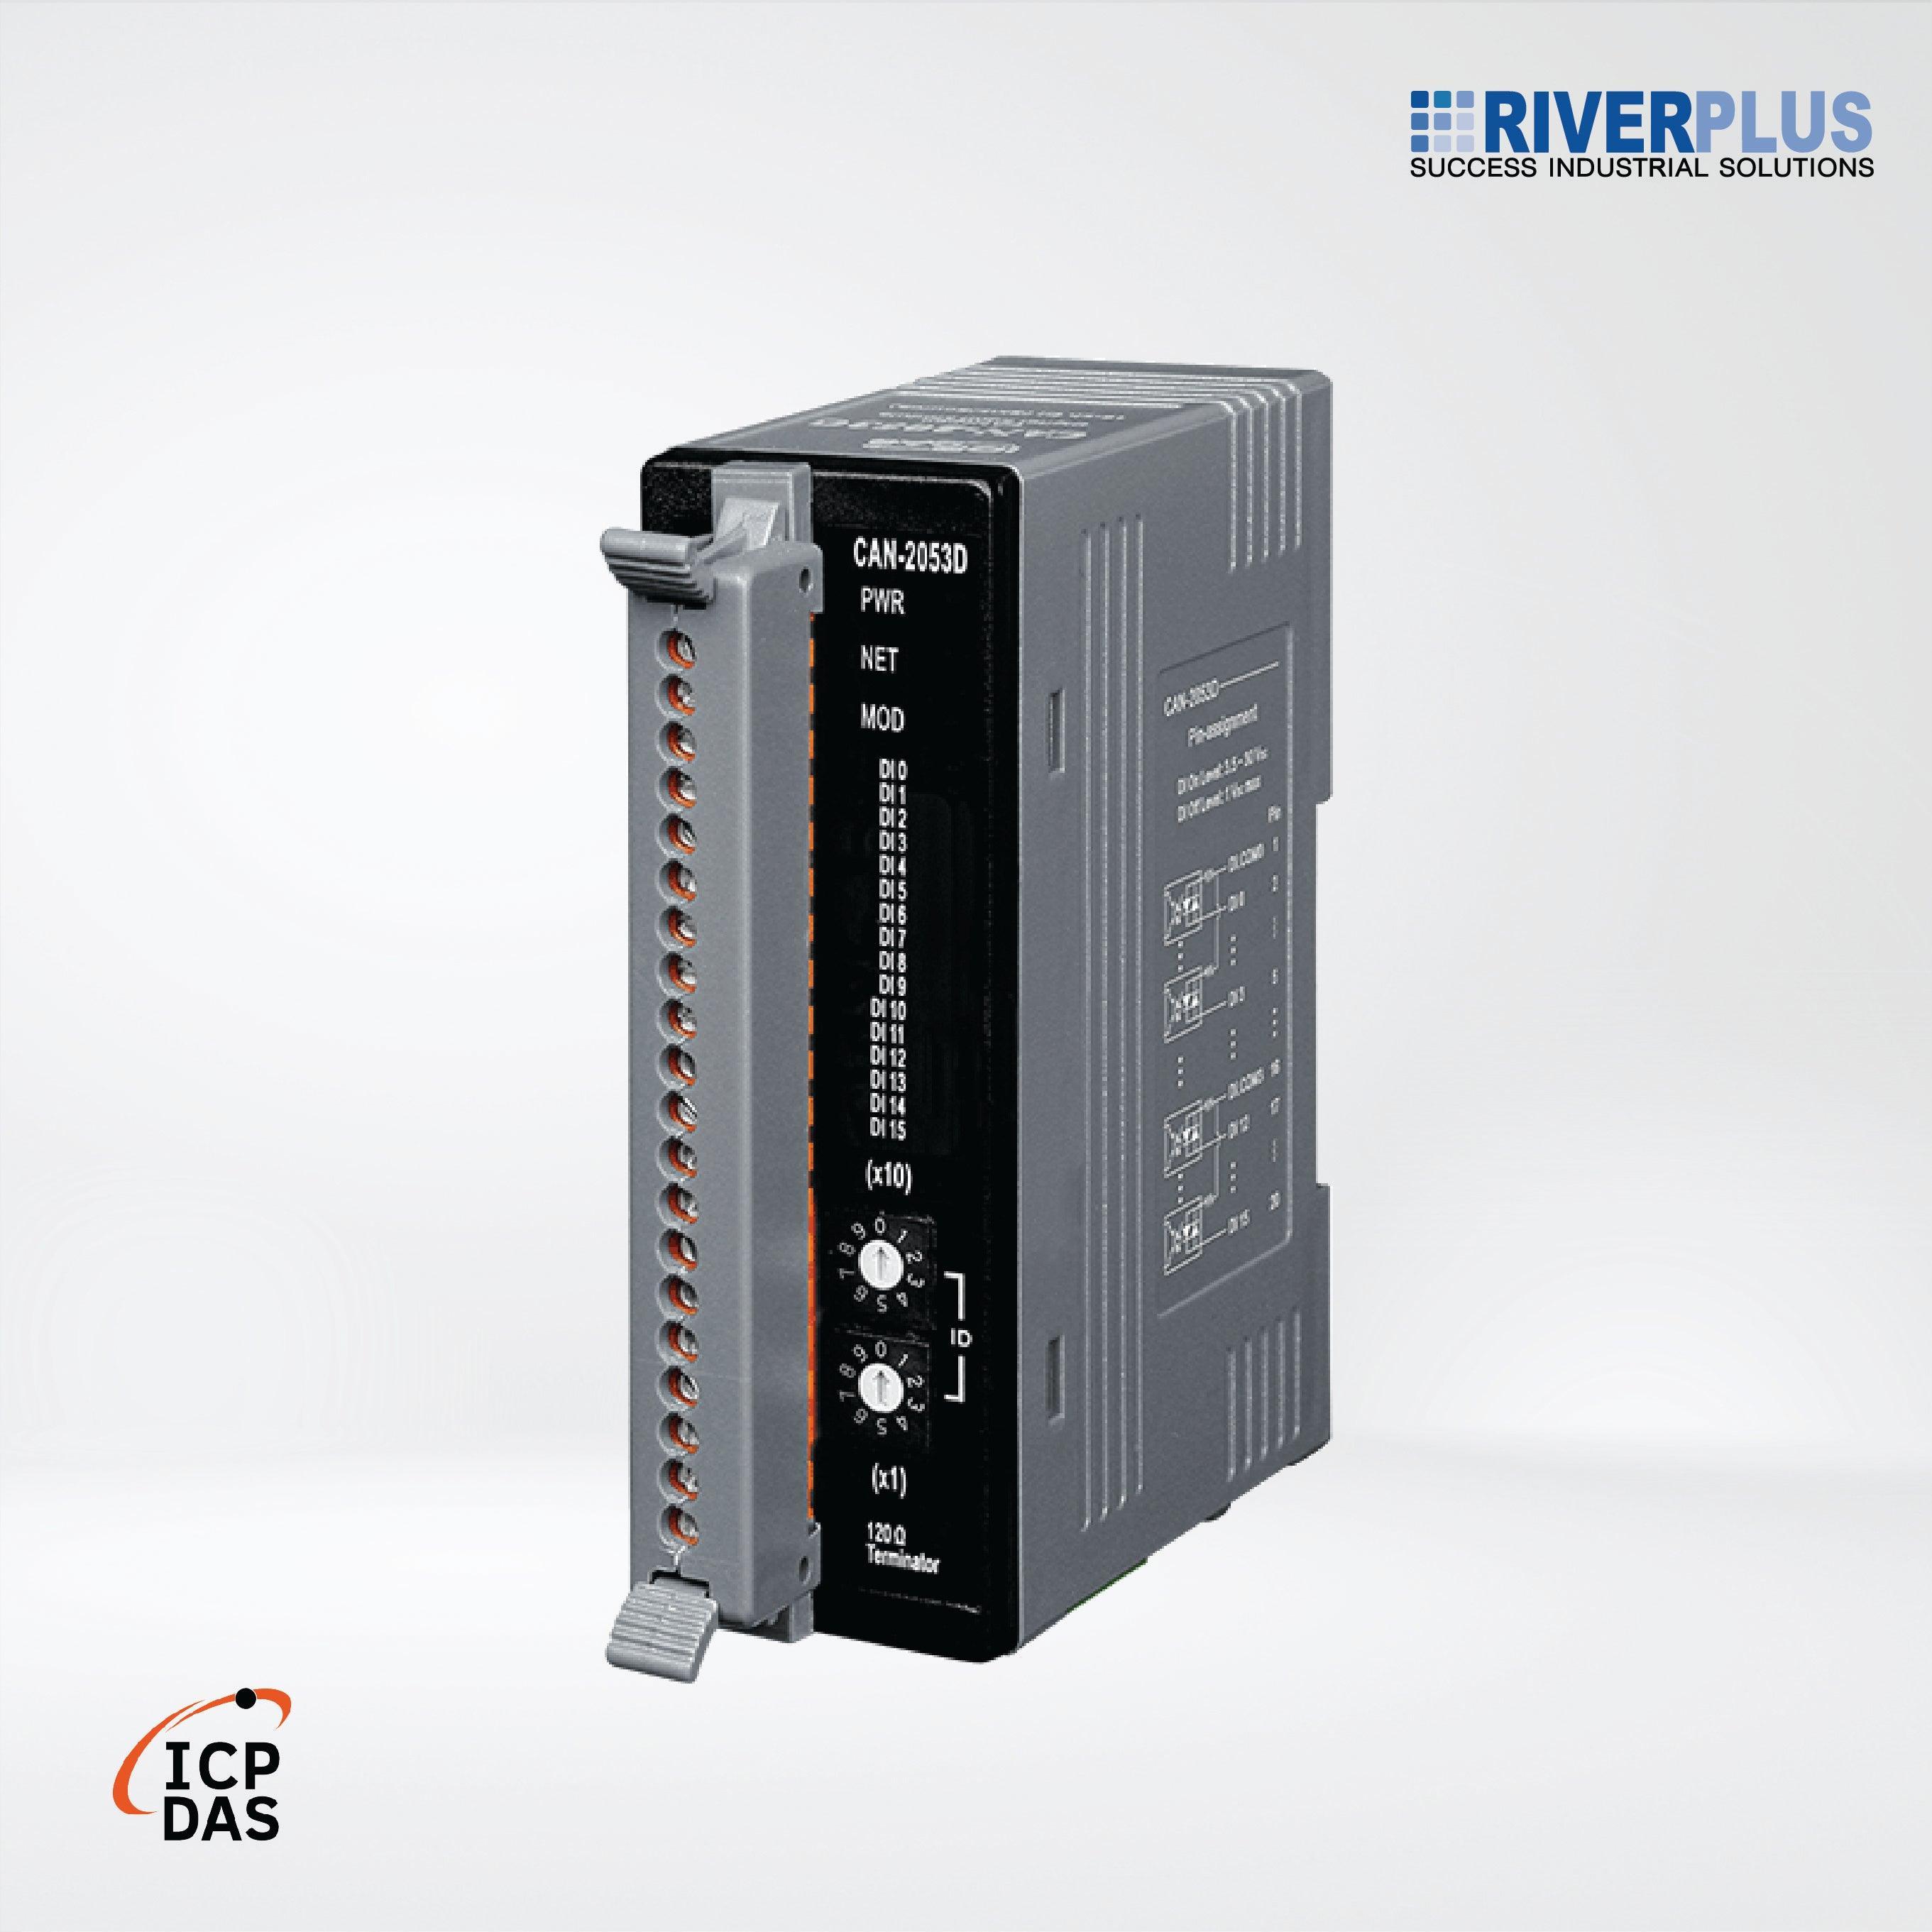 CAN-2053D DeviceNet Slave Module of 16-channel Isolated (Wet) DI - Riverplus